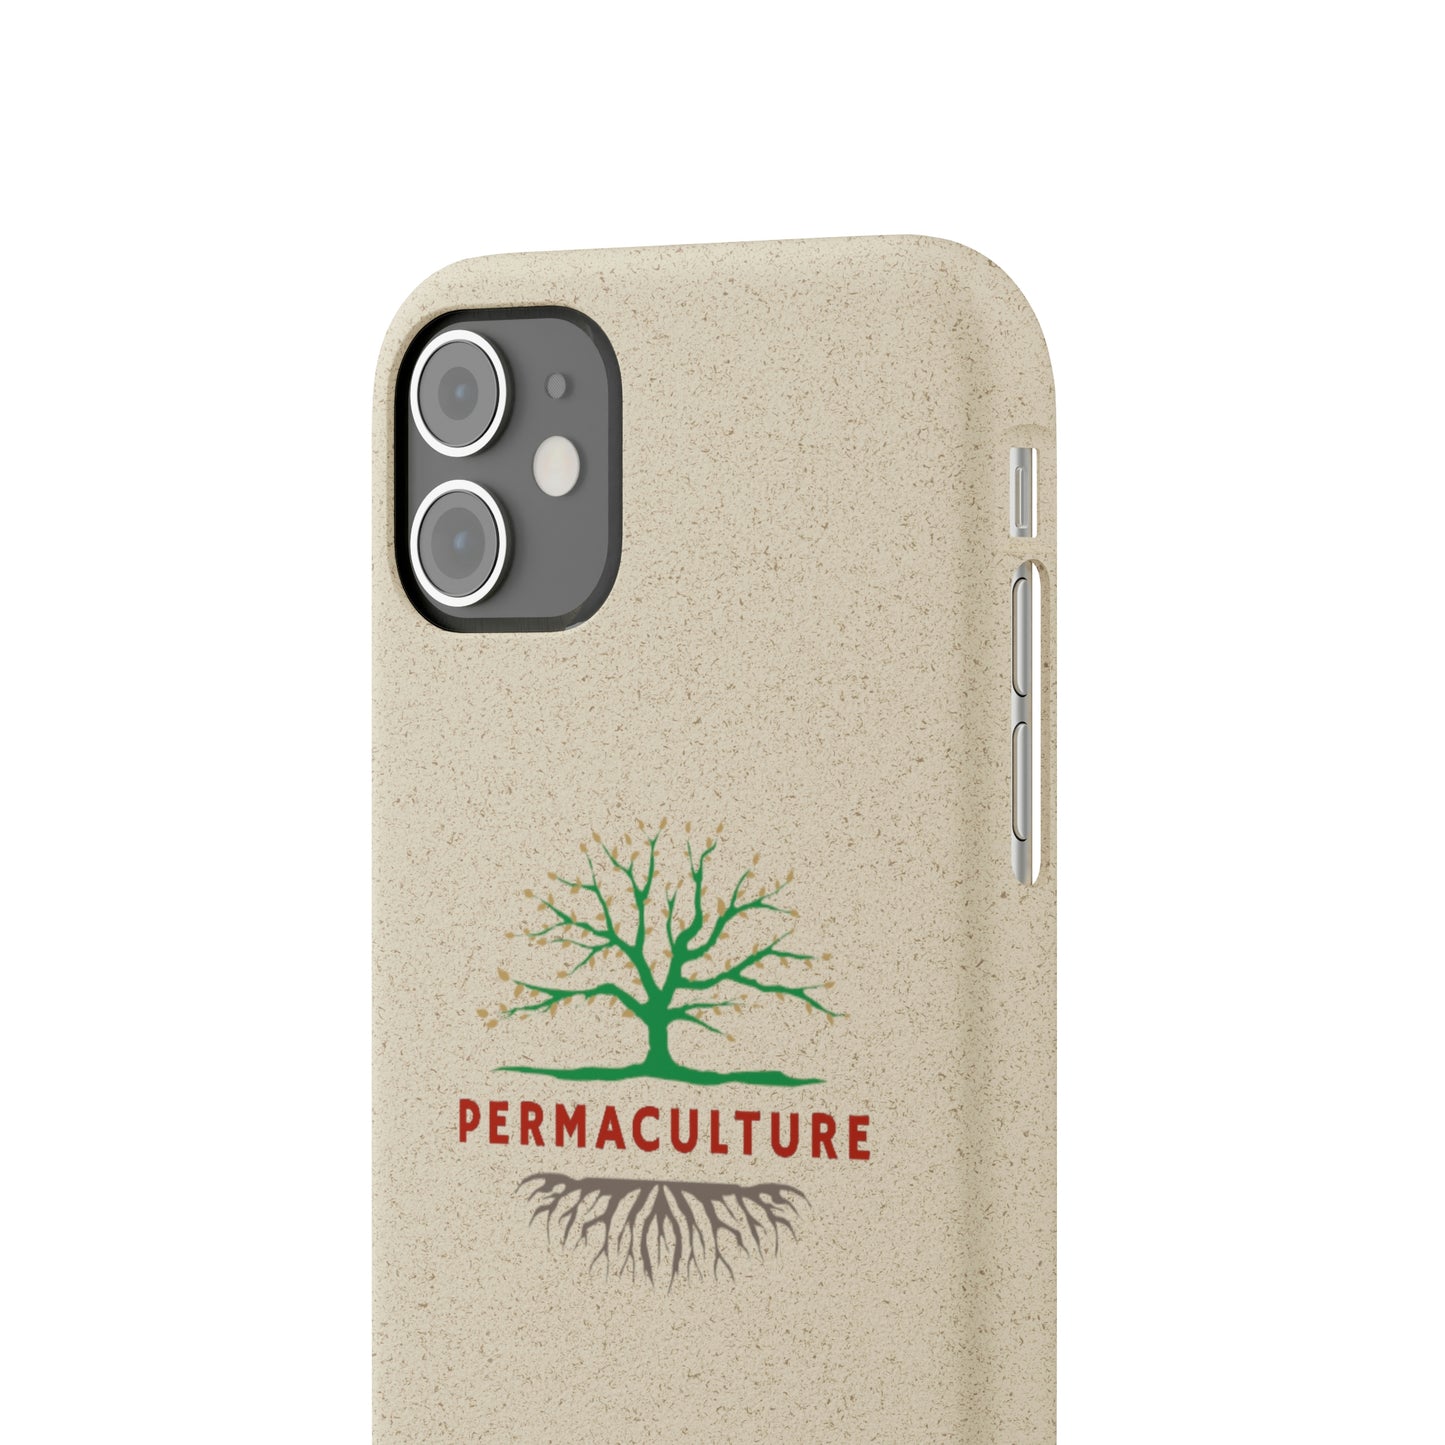 Biodegradable iPhone Cases - Permaculture